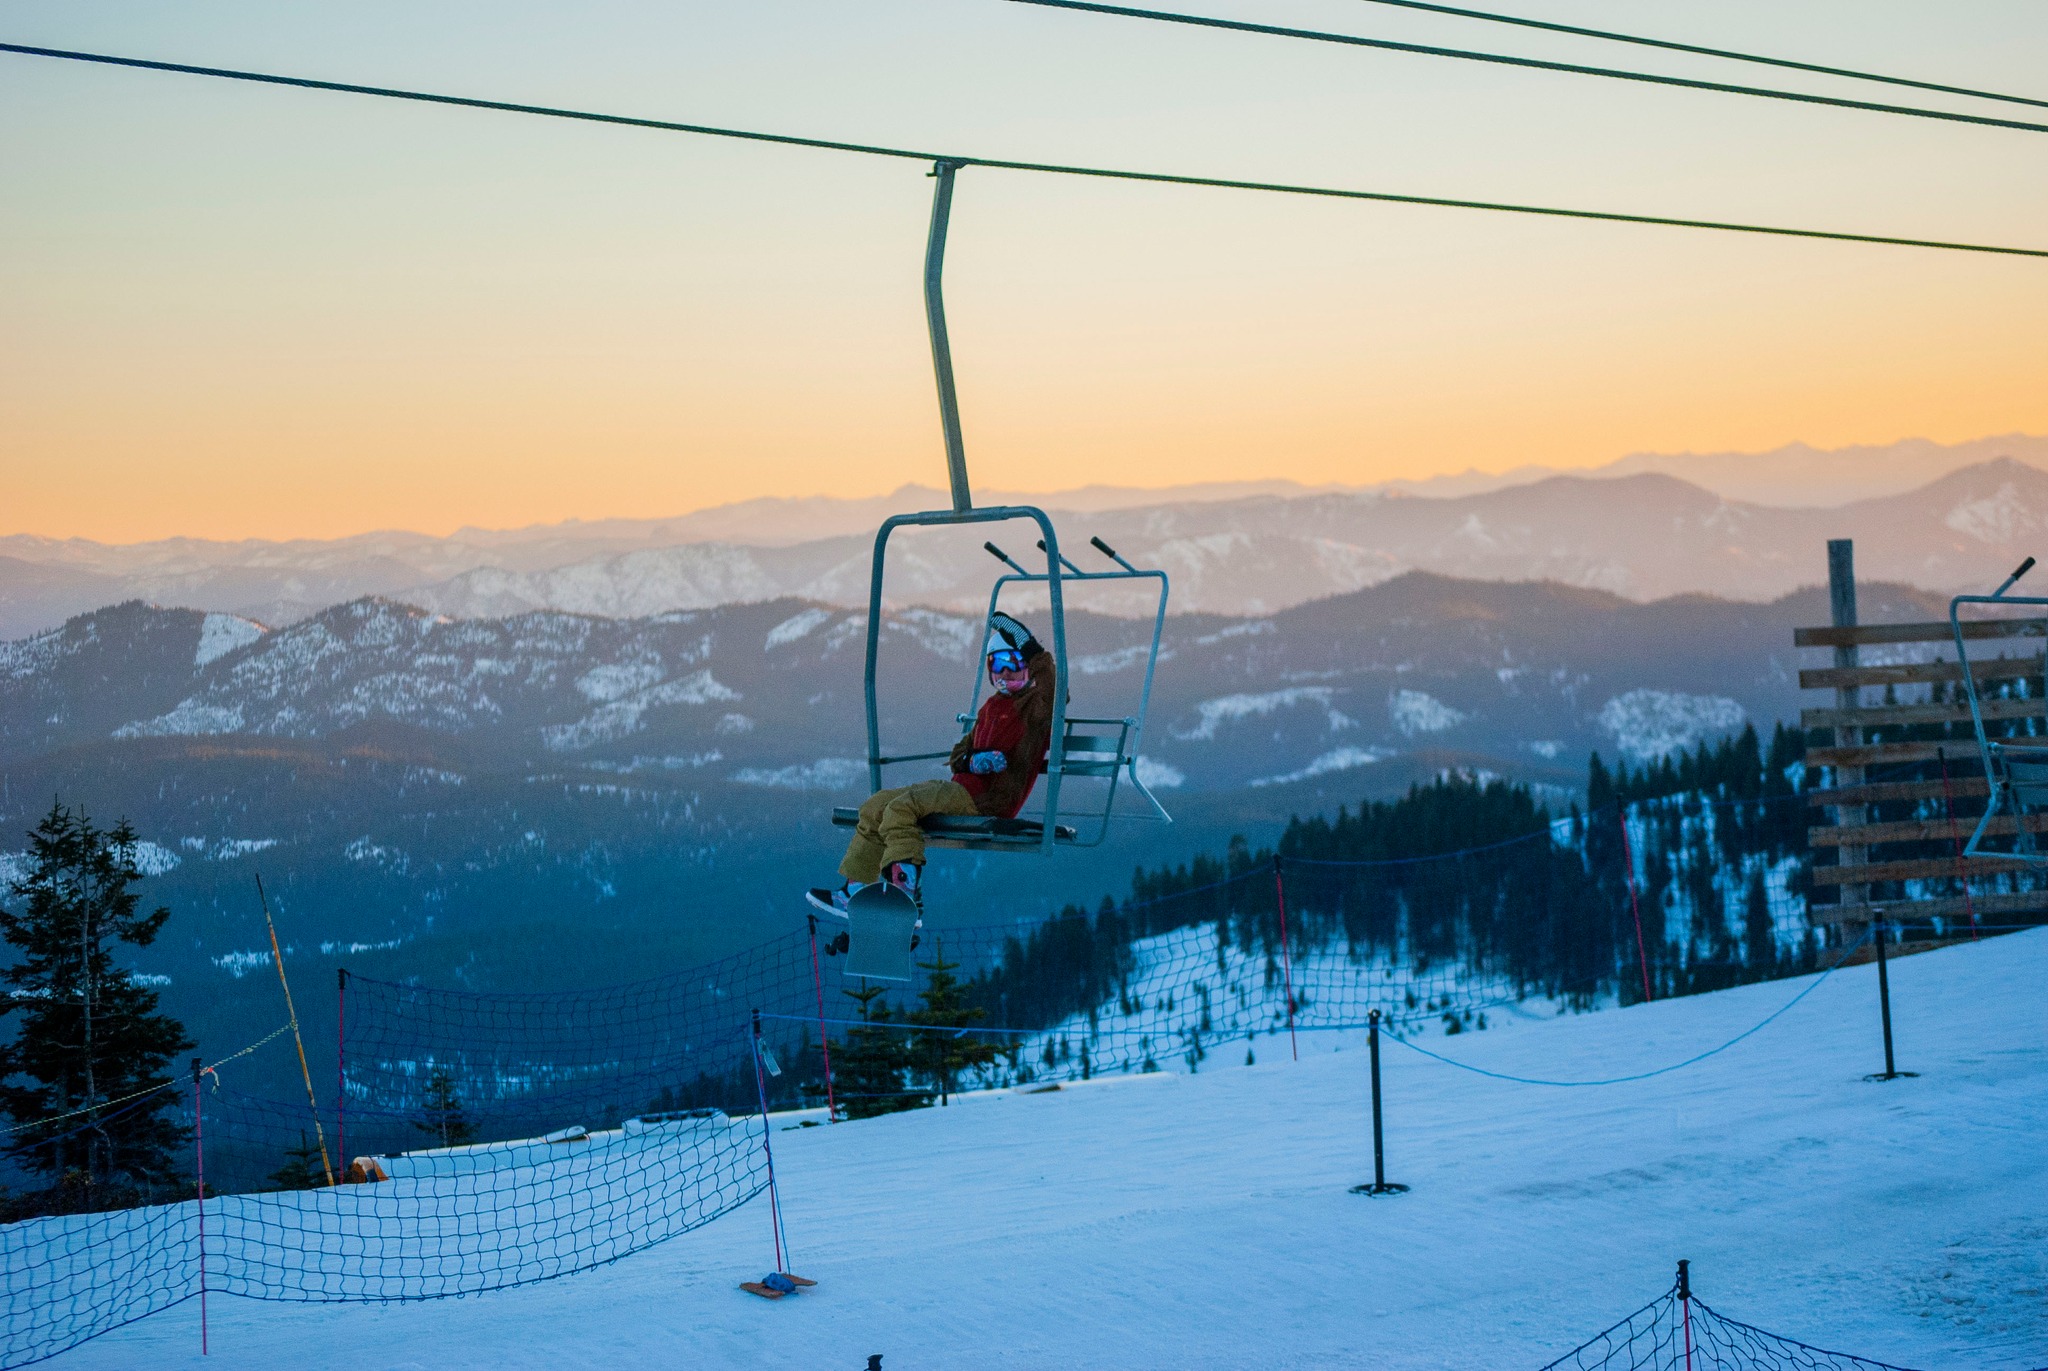 A person rides a chair lift at Mount Ashland.